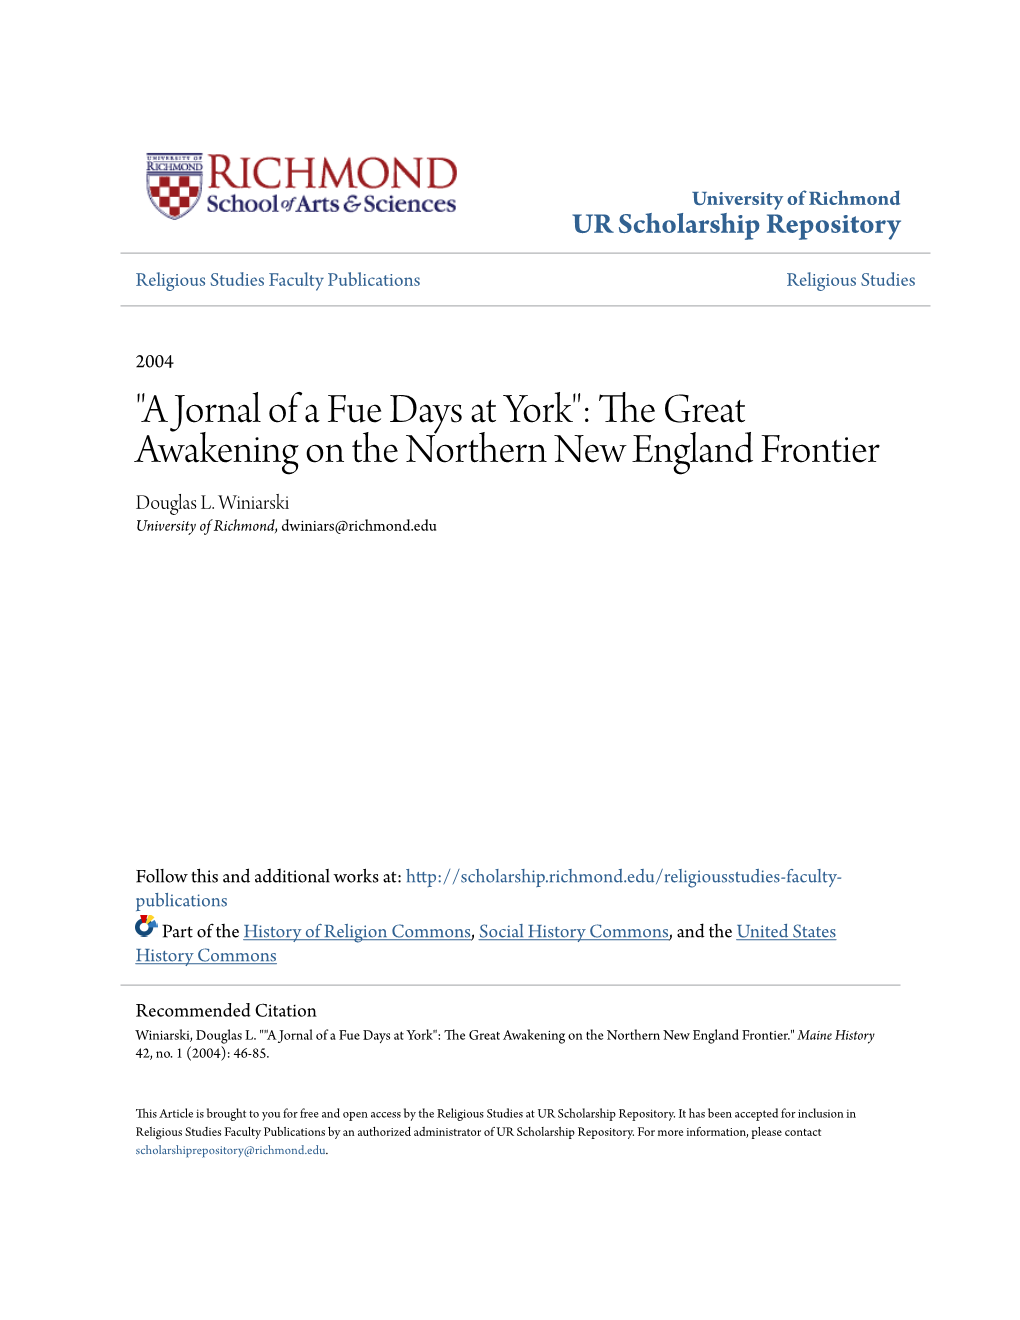 "A Jornal of a Fue Days at York": the Great Awakening on the Northern New England Frontier Douglas L